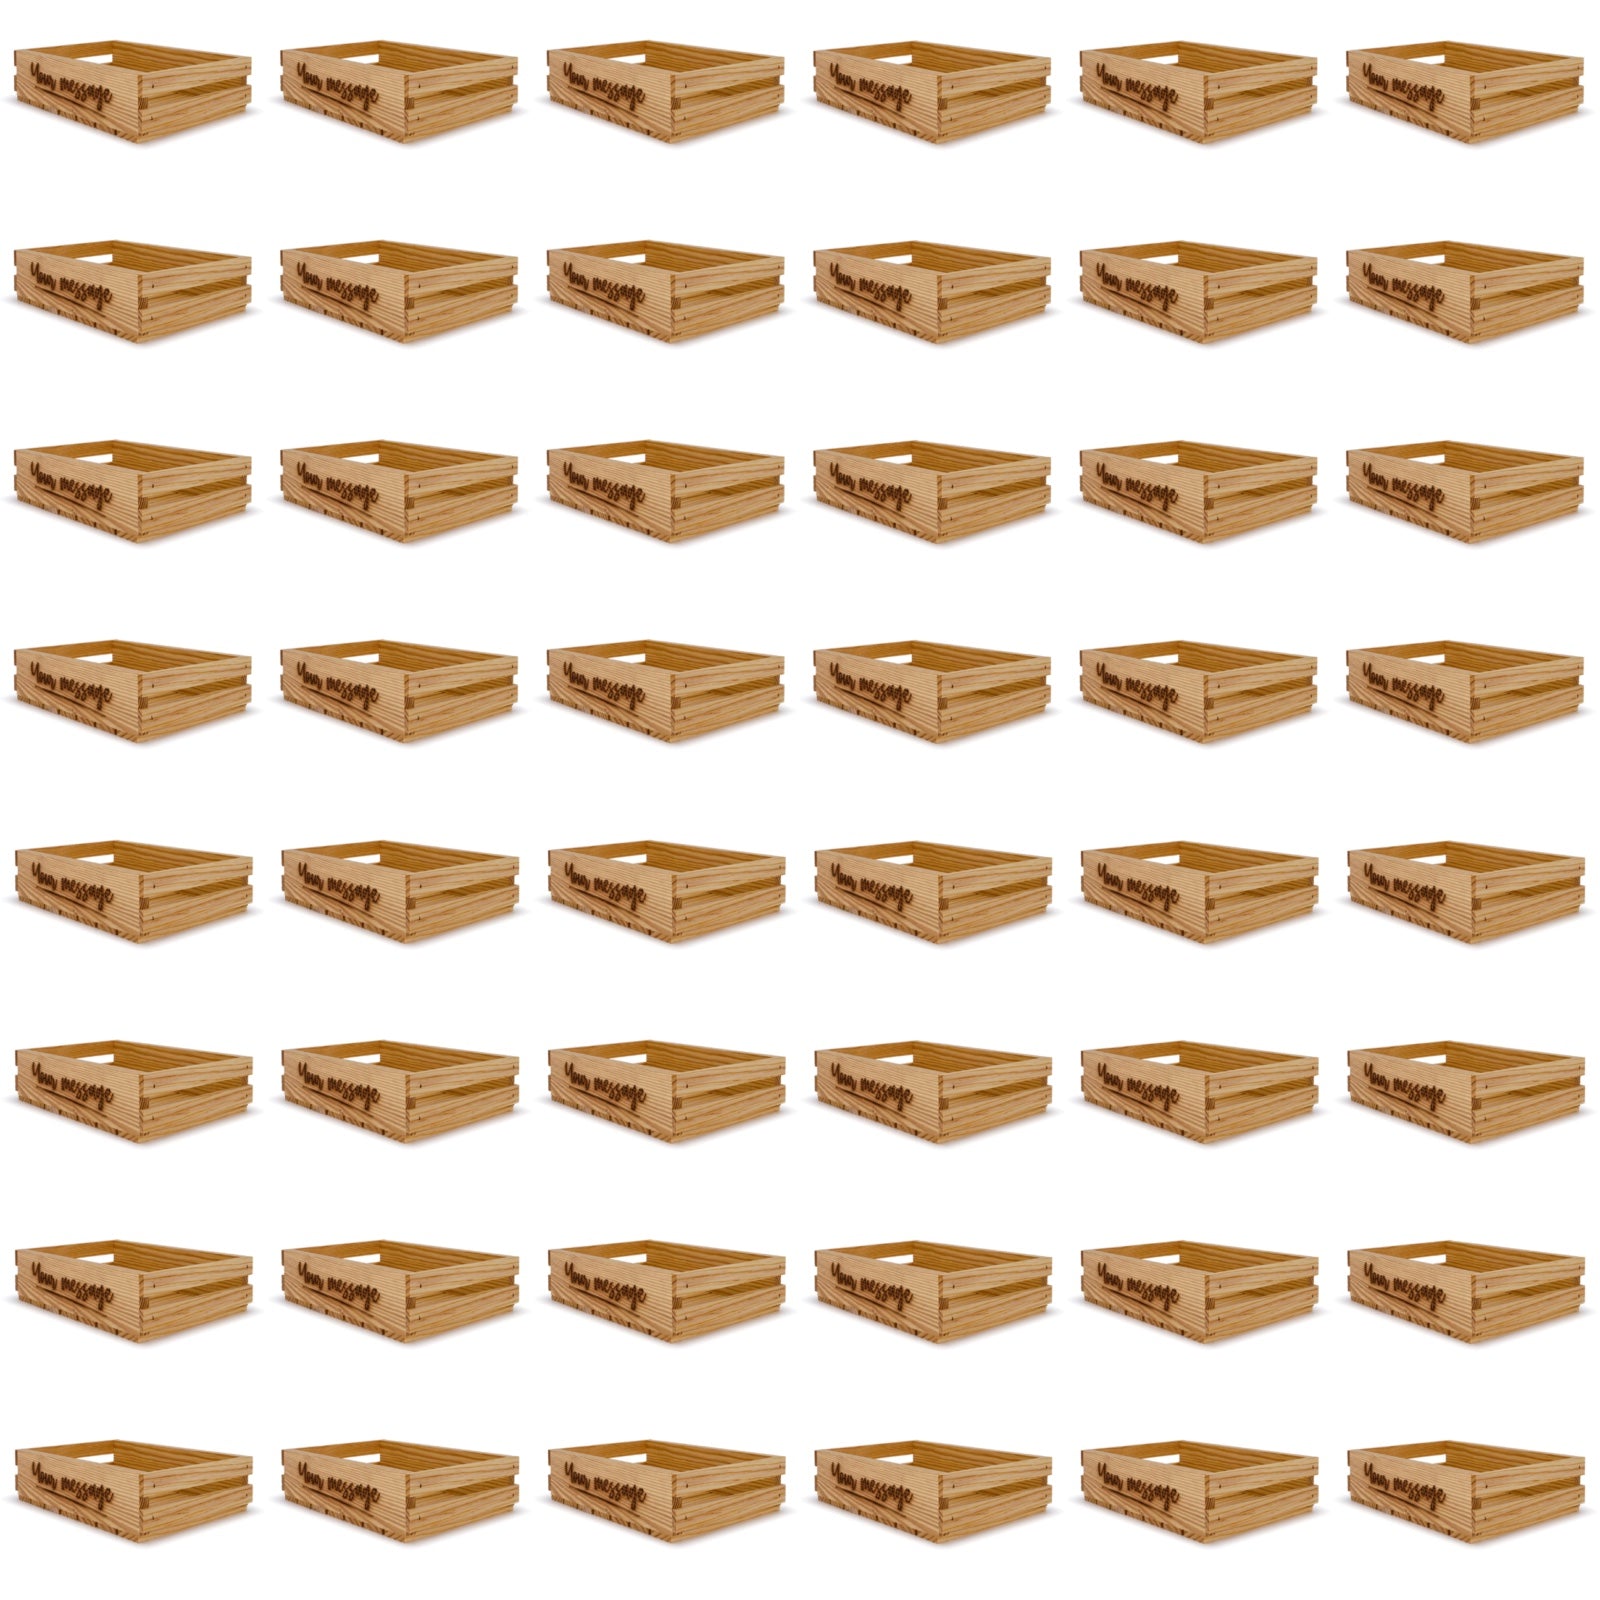 48 Small wooden crates 9x14x3.5 your message included